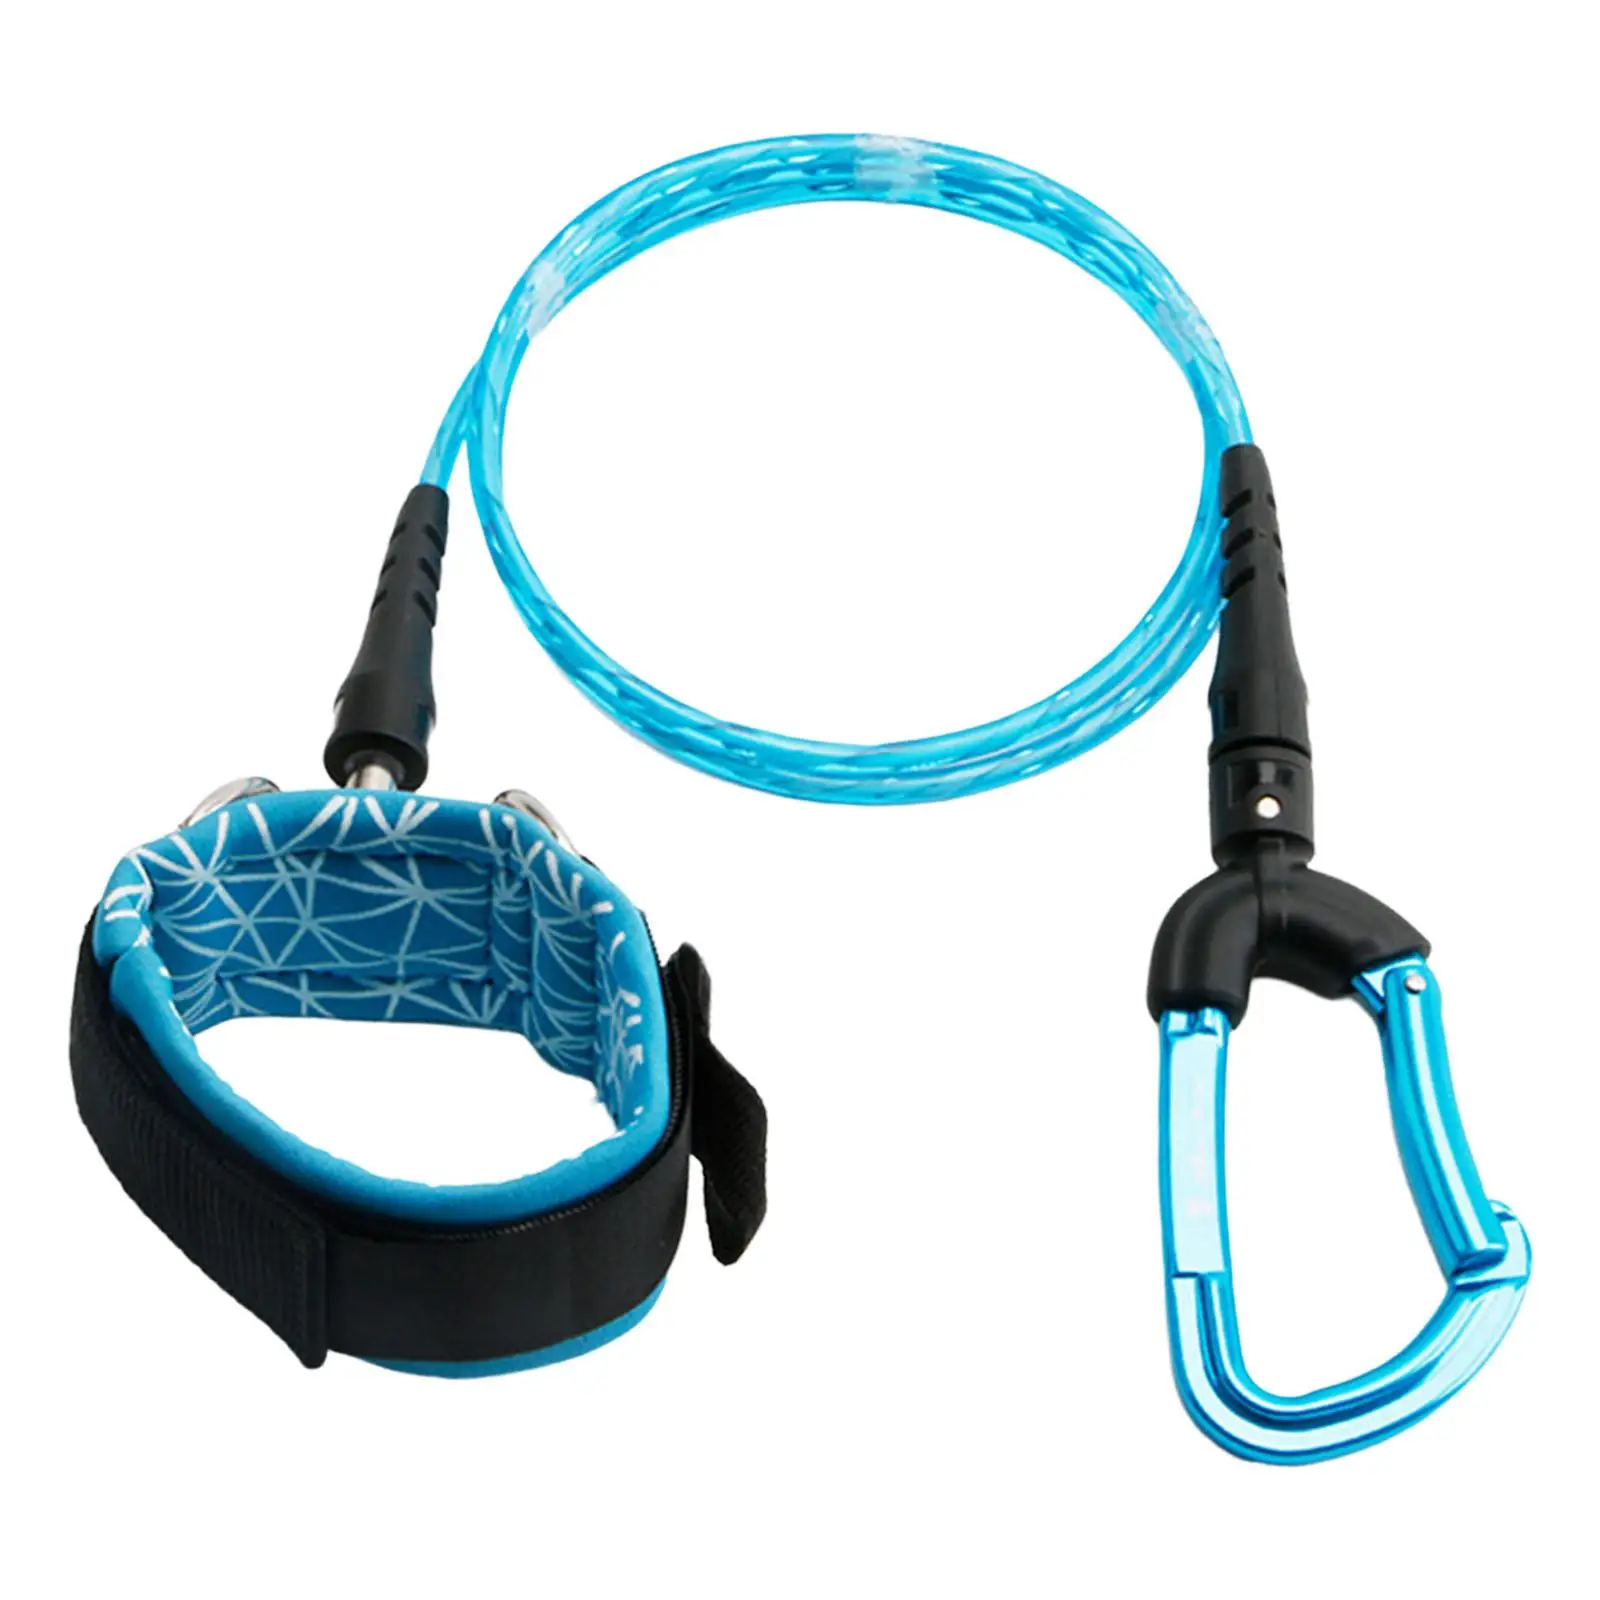 Freediving Lanyard Breaking Force 24kN Adjustable Fit for Underwater Sports